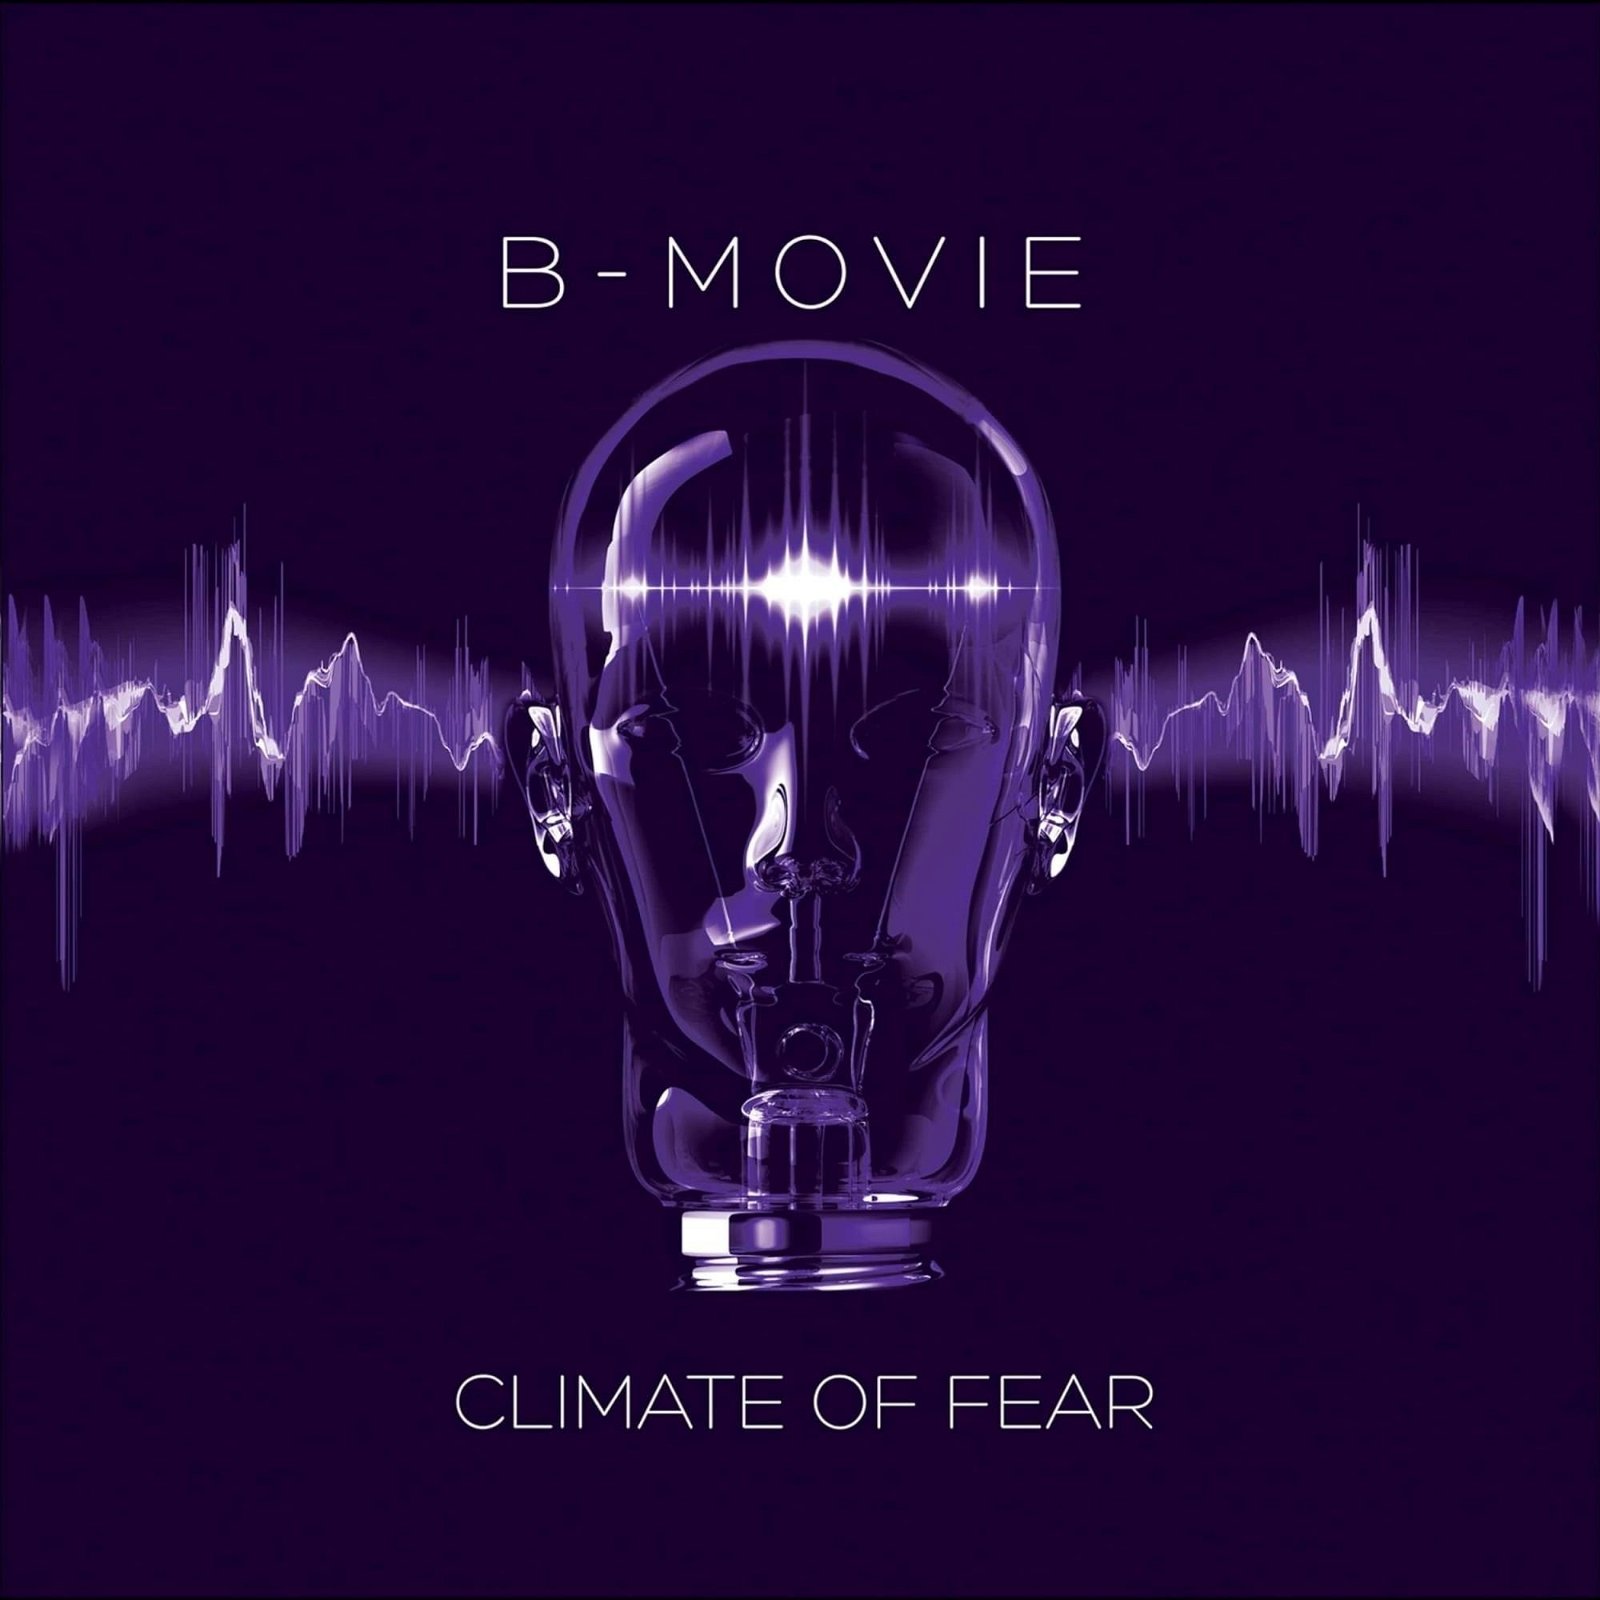 CD Shop - B-MOVIE CLIMATE OF FEAR